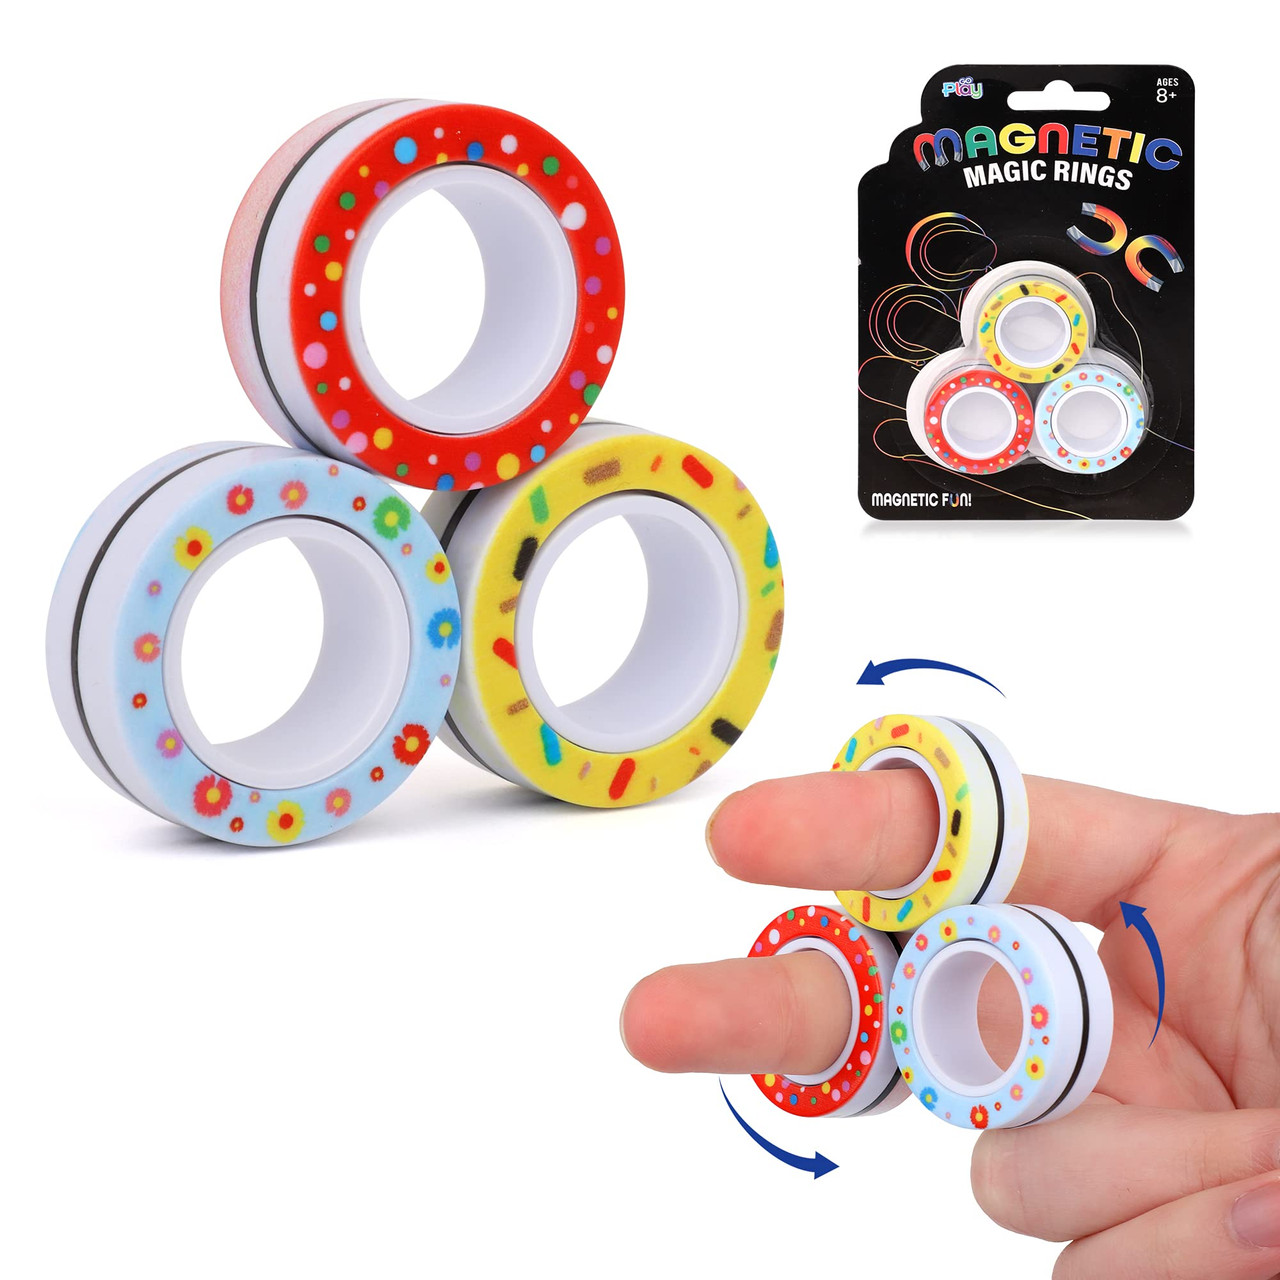 Go Play Magnetic Magic Toy, 3 Pack Stress Relief Rings, Therapy Magnetic Finger Toy, Great for Kids with ADHD. - Toys 4 U